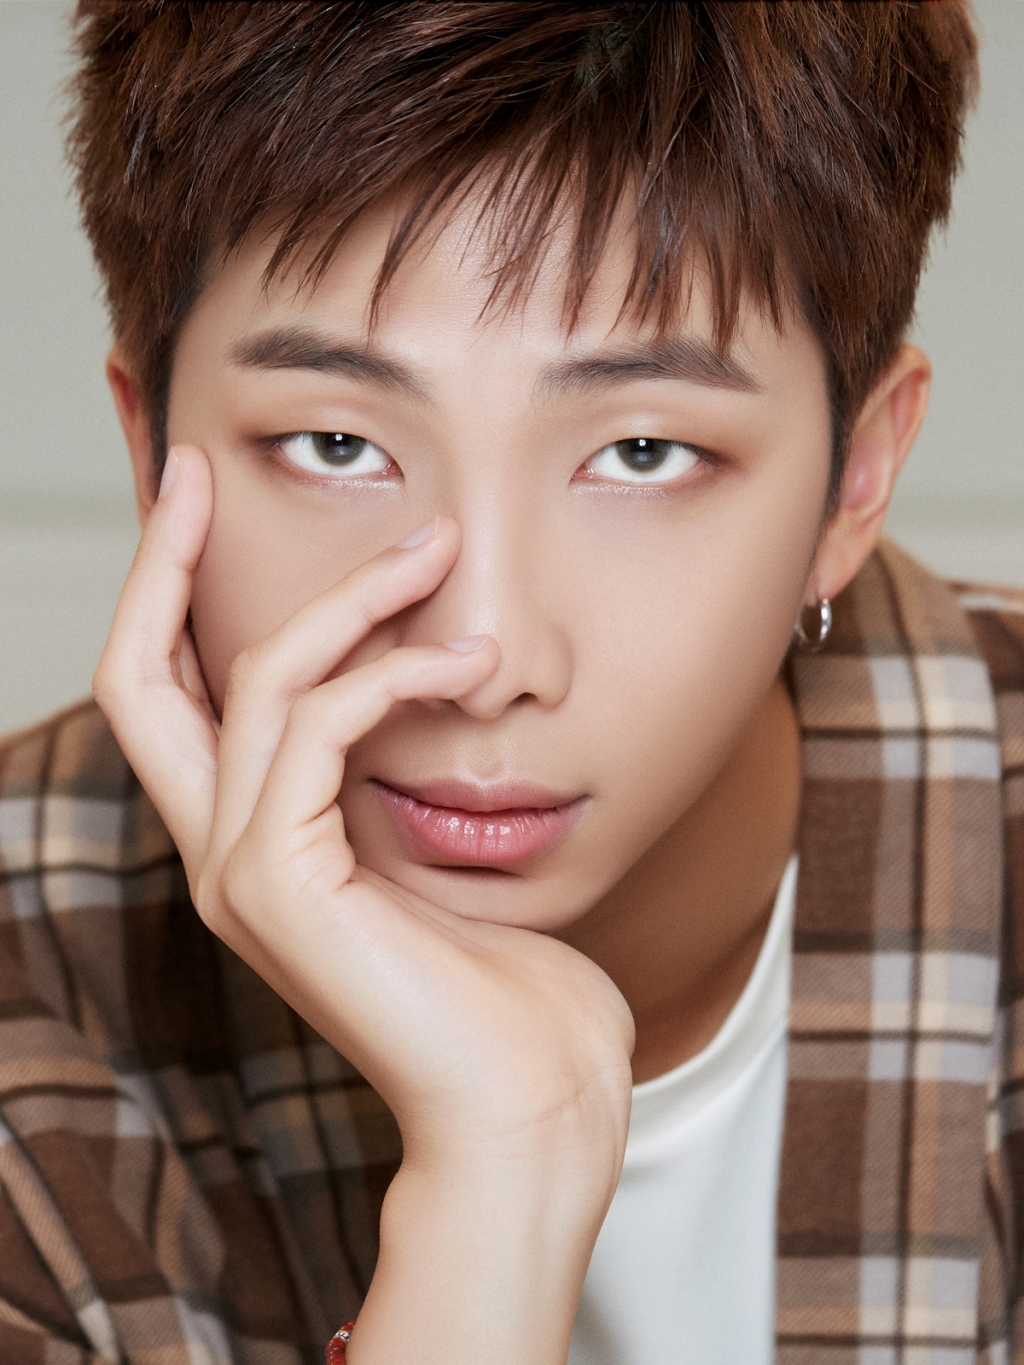 Group BTS RM released a concept photo of the new album Deluxe Edition (BE).BTS RM posted a concept photo on the 4th of the official SNS on the 4th, showing a sitting in Sofa in a room with a warm atmosphere.The close-up shot, which was impressive with intense eyes, also made former World fans excited.The RMs room, decorated with white and wood colors, gives a clean and warm feel overall.RM introduced the room in detail through the audio guide released on the official website of Big Hit Entertainment at the same time as the concept photo.It is the charm point of this room that is filled with warmth like in a product.I have decorated it with wood in a white interior that can feel comfortable without being tired as it is a room where I spend my daily life. The thing that best expresses me in this room is a wooden prop; it seems that all the trees in this room, from wooden pots, dolls, tables and walls, best represented me, RM added.BTS has been introducing concept photos for each member of Deluxe Edition (BE), which has been decorated according to their own tastes since the 2nd.Close-Up shots focused on the photos and faces of the room concept for each member, raising the hot interest and expectation of former World fans for the new album.Meanwhile, BTS will release its new album Deluxe Edition (BE) on the 20th and will release the performance of the new album title song Life Goes On for the first time in 2020 American Music Awards held on the 22nd (United States of America time).